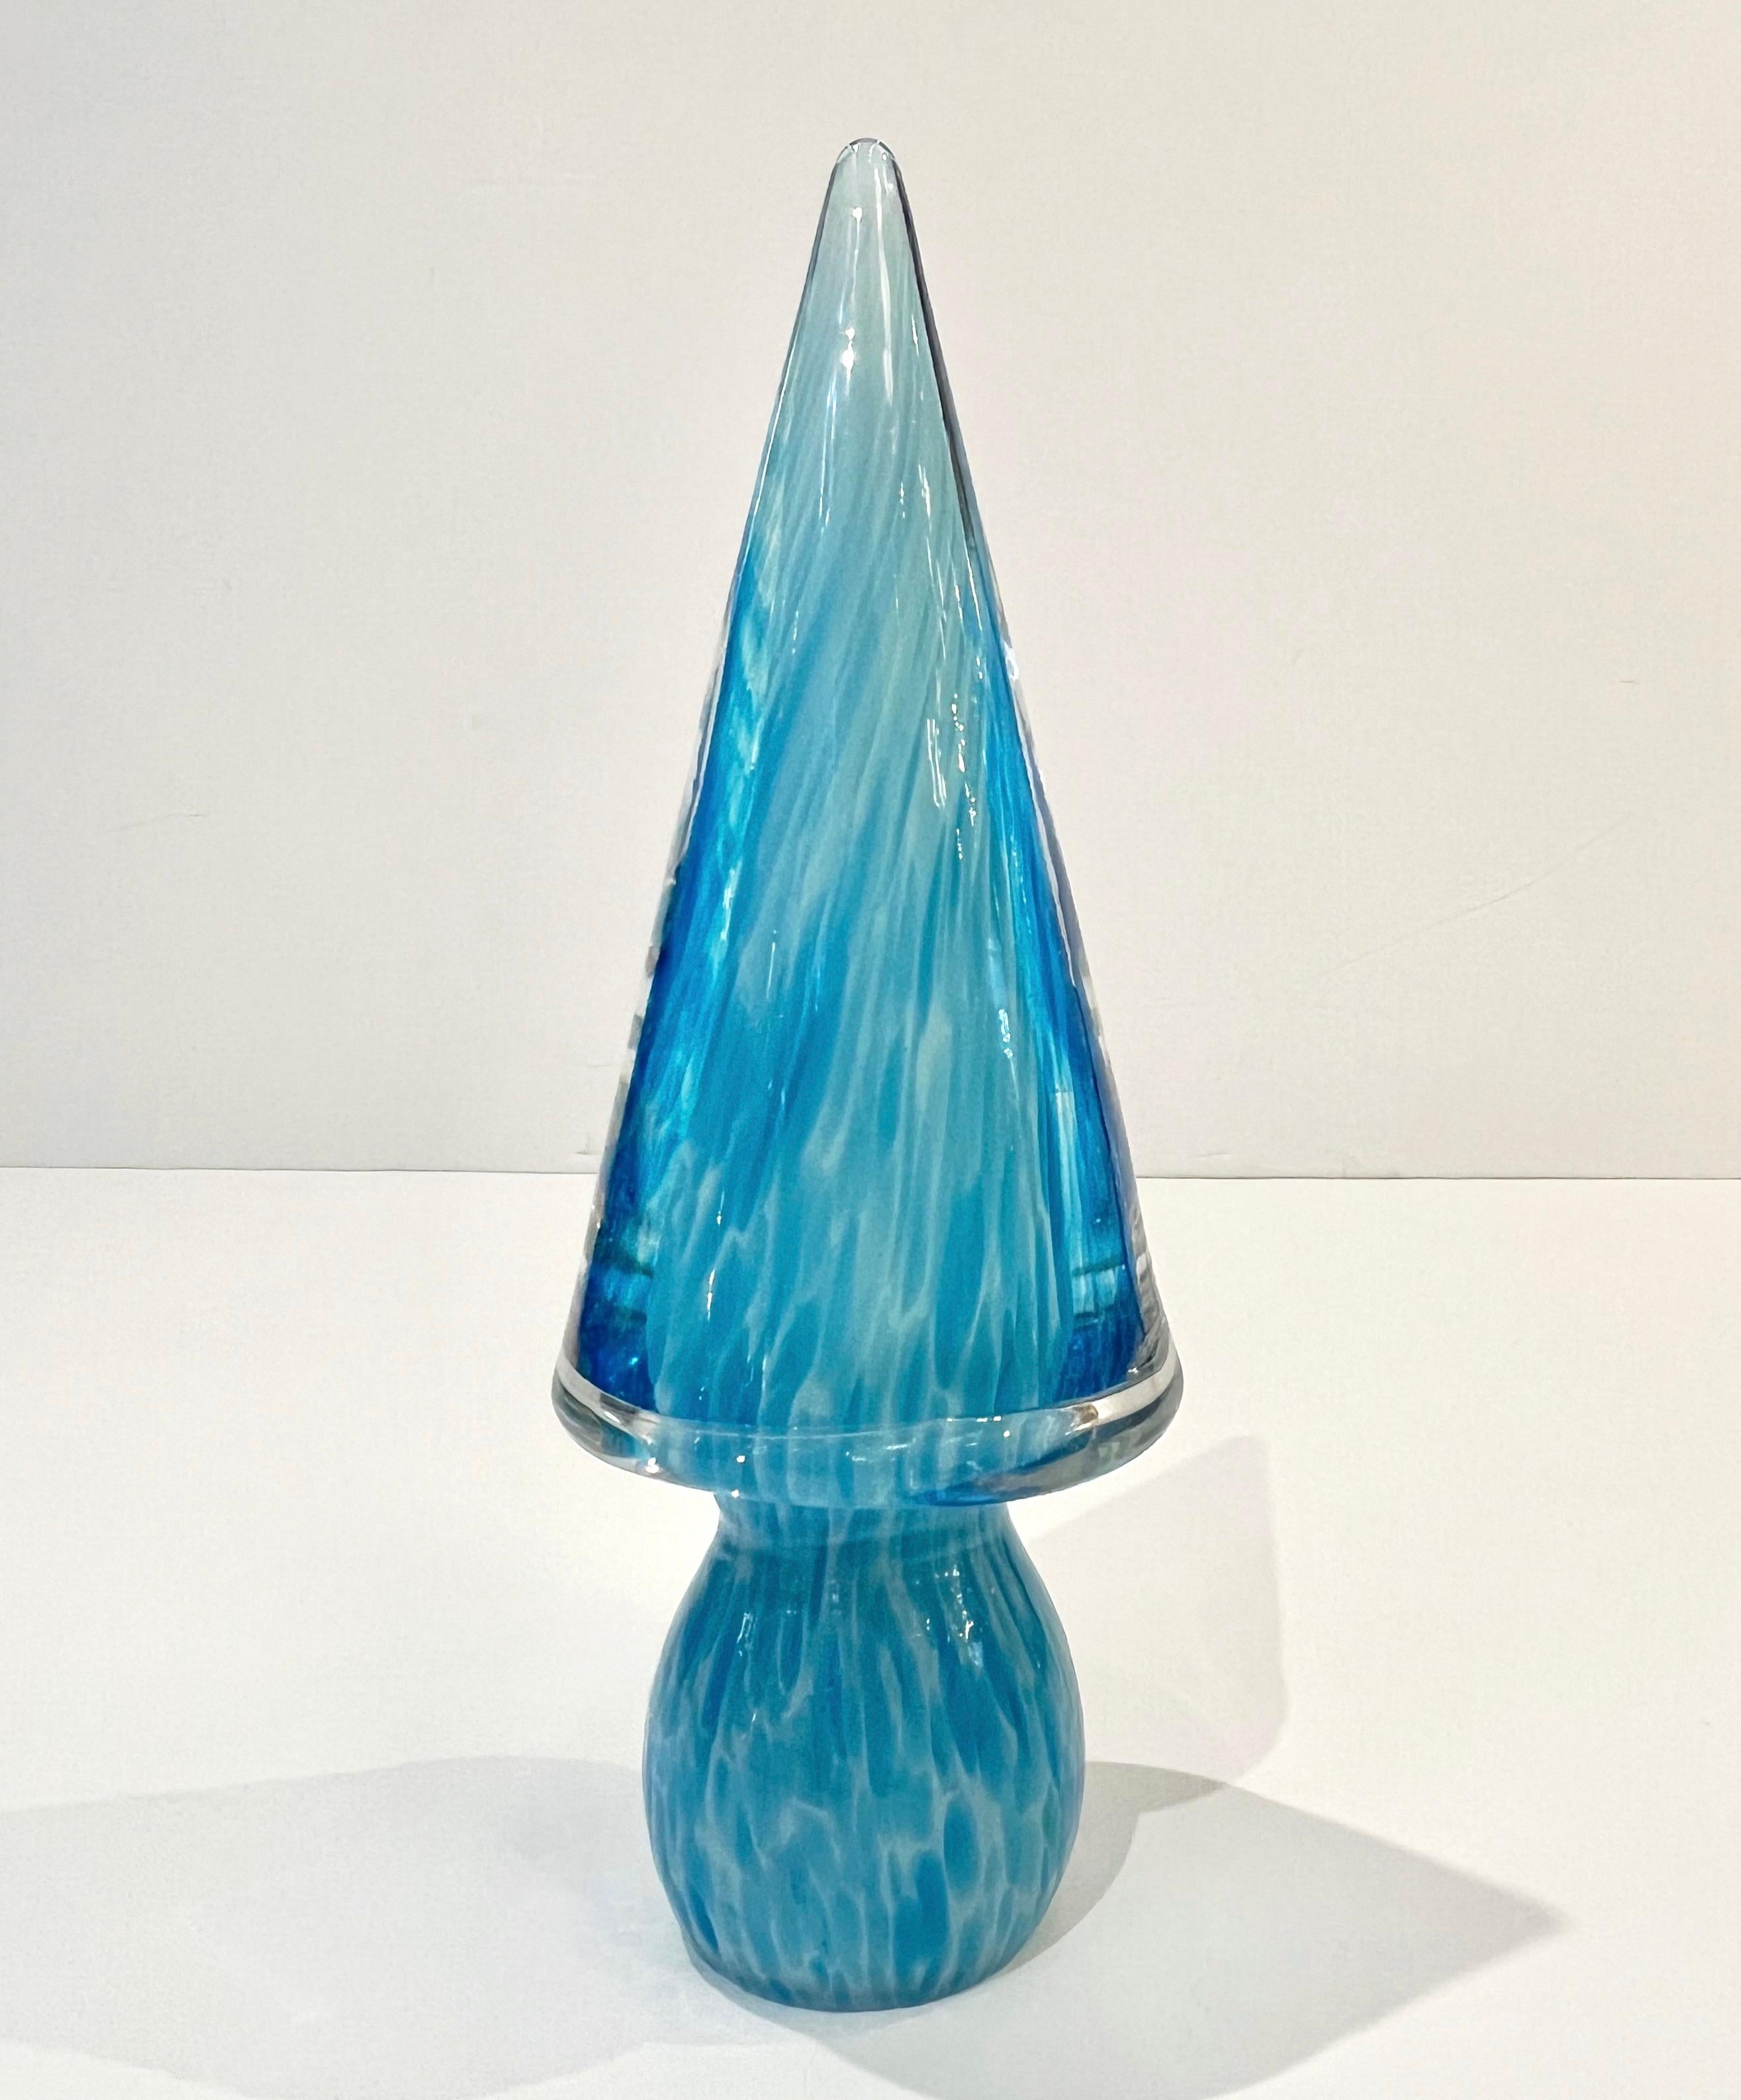 Formia 1980s Italian Vintage Turquoise Blue & White Murano Glass Tree Sculpture For Sale 4